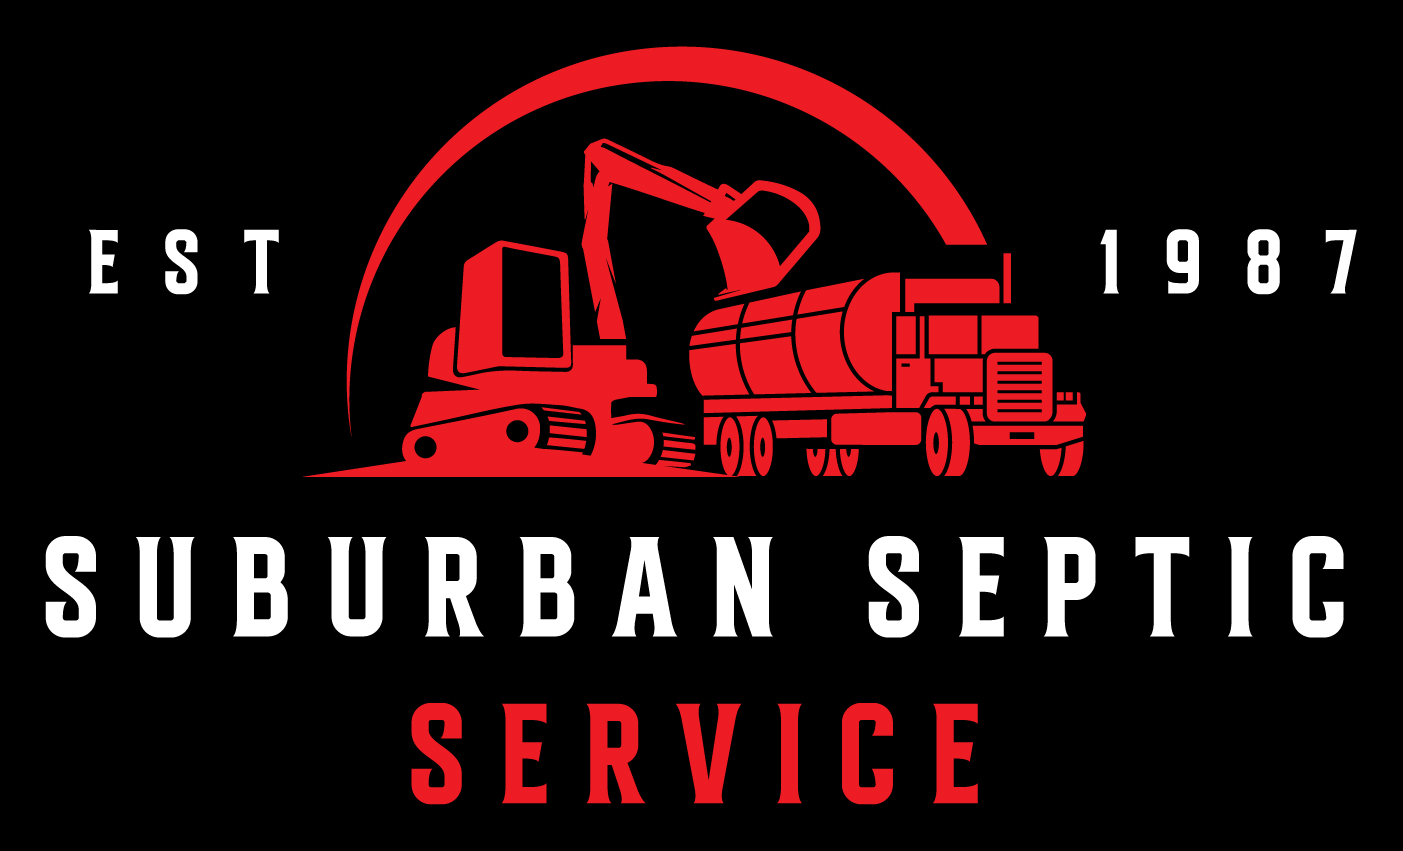 Suburban Septic Service - Family-Owned & Operated Full Service Septic Company Since 1987